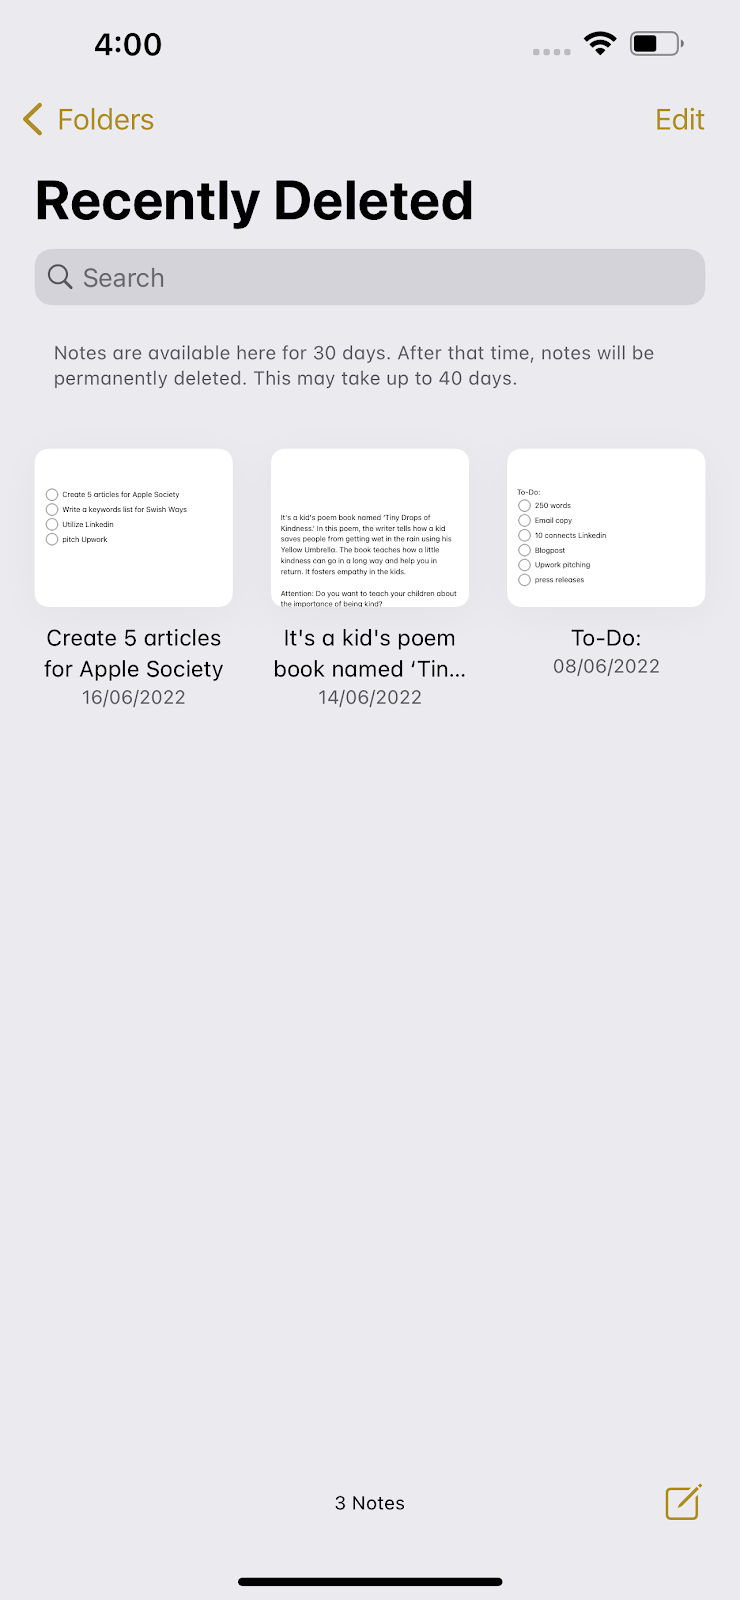 How to retrieve notes from iCloud